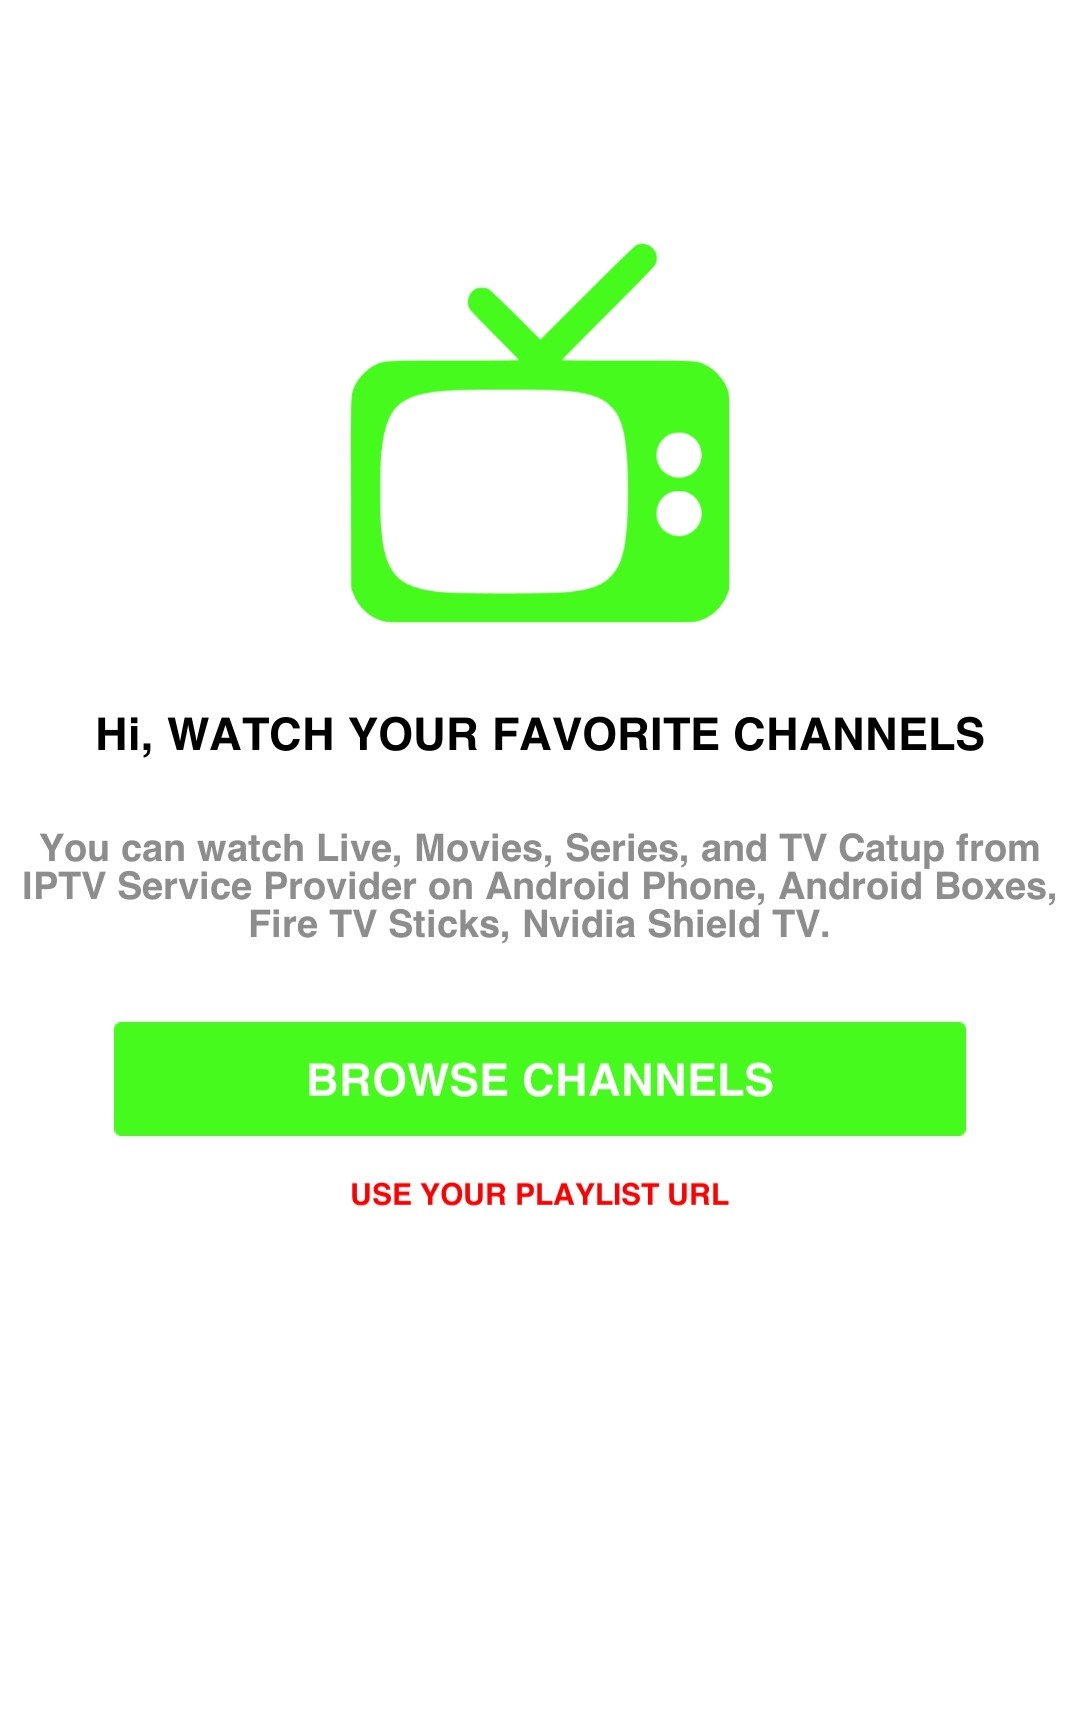 Select Use Your Playlist URL to stream Project IPTV